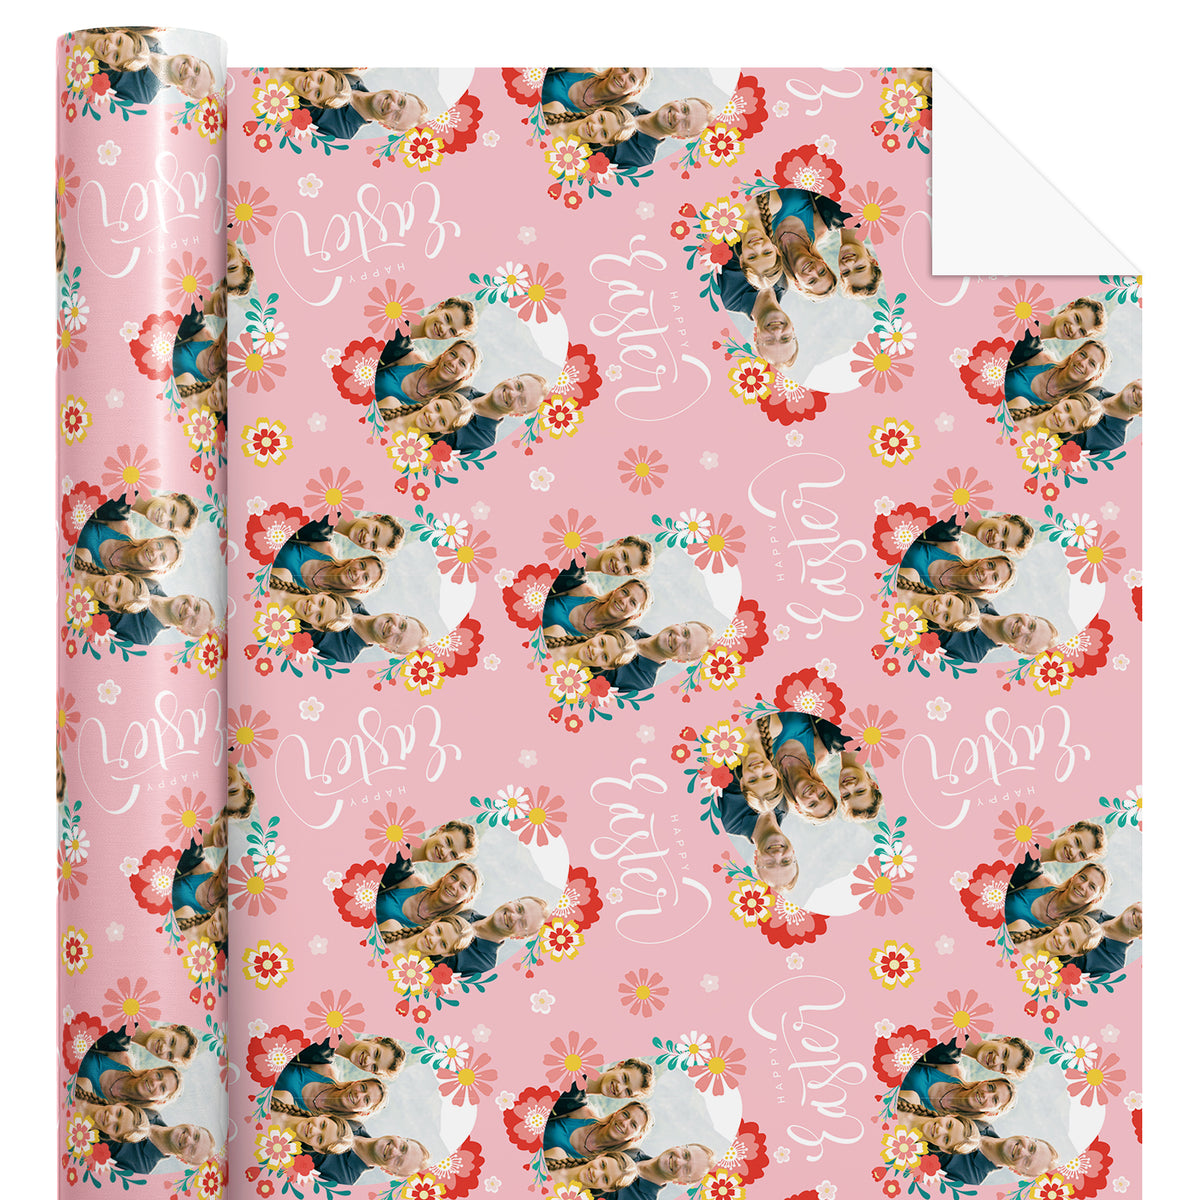 Custom Family Photo Printed Wrapping Paper, Personalized Photo